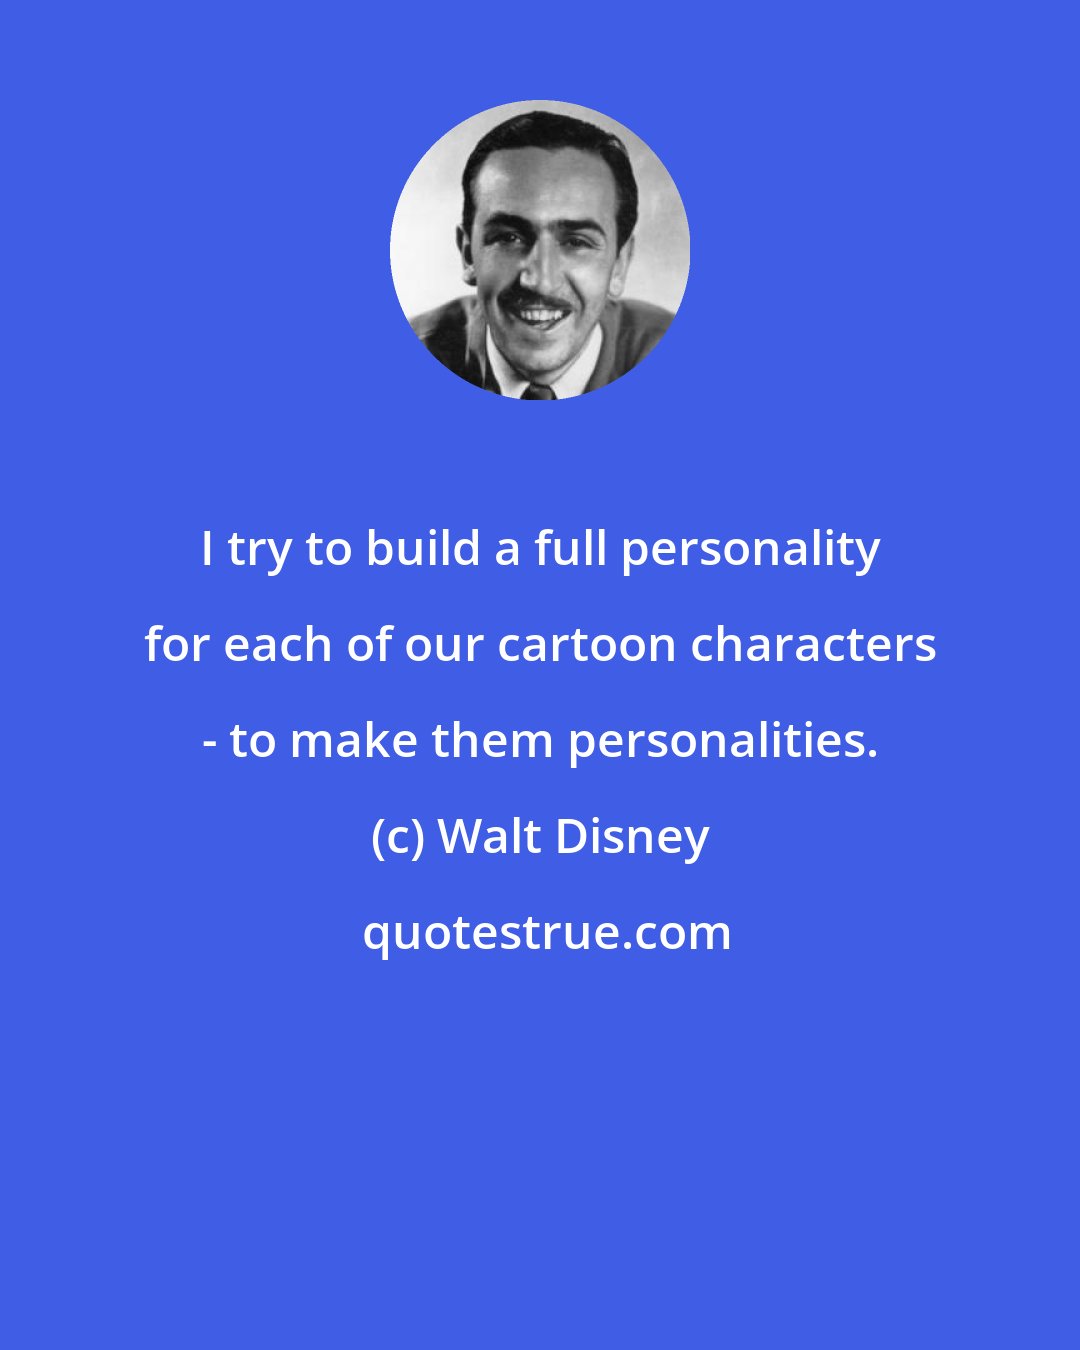 Walt Disney: I try to build a full personality for each of our cartoon characters - to make them personalities.